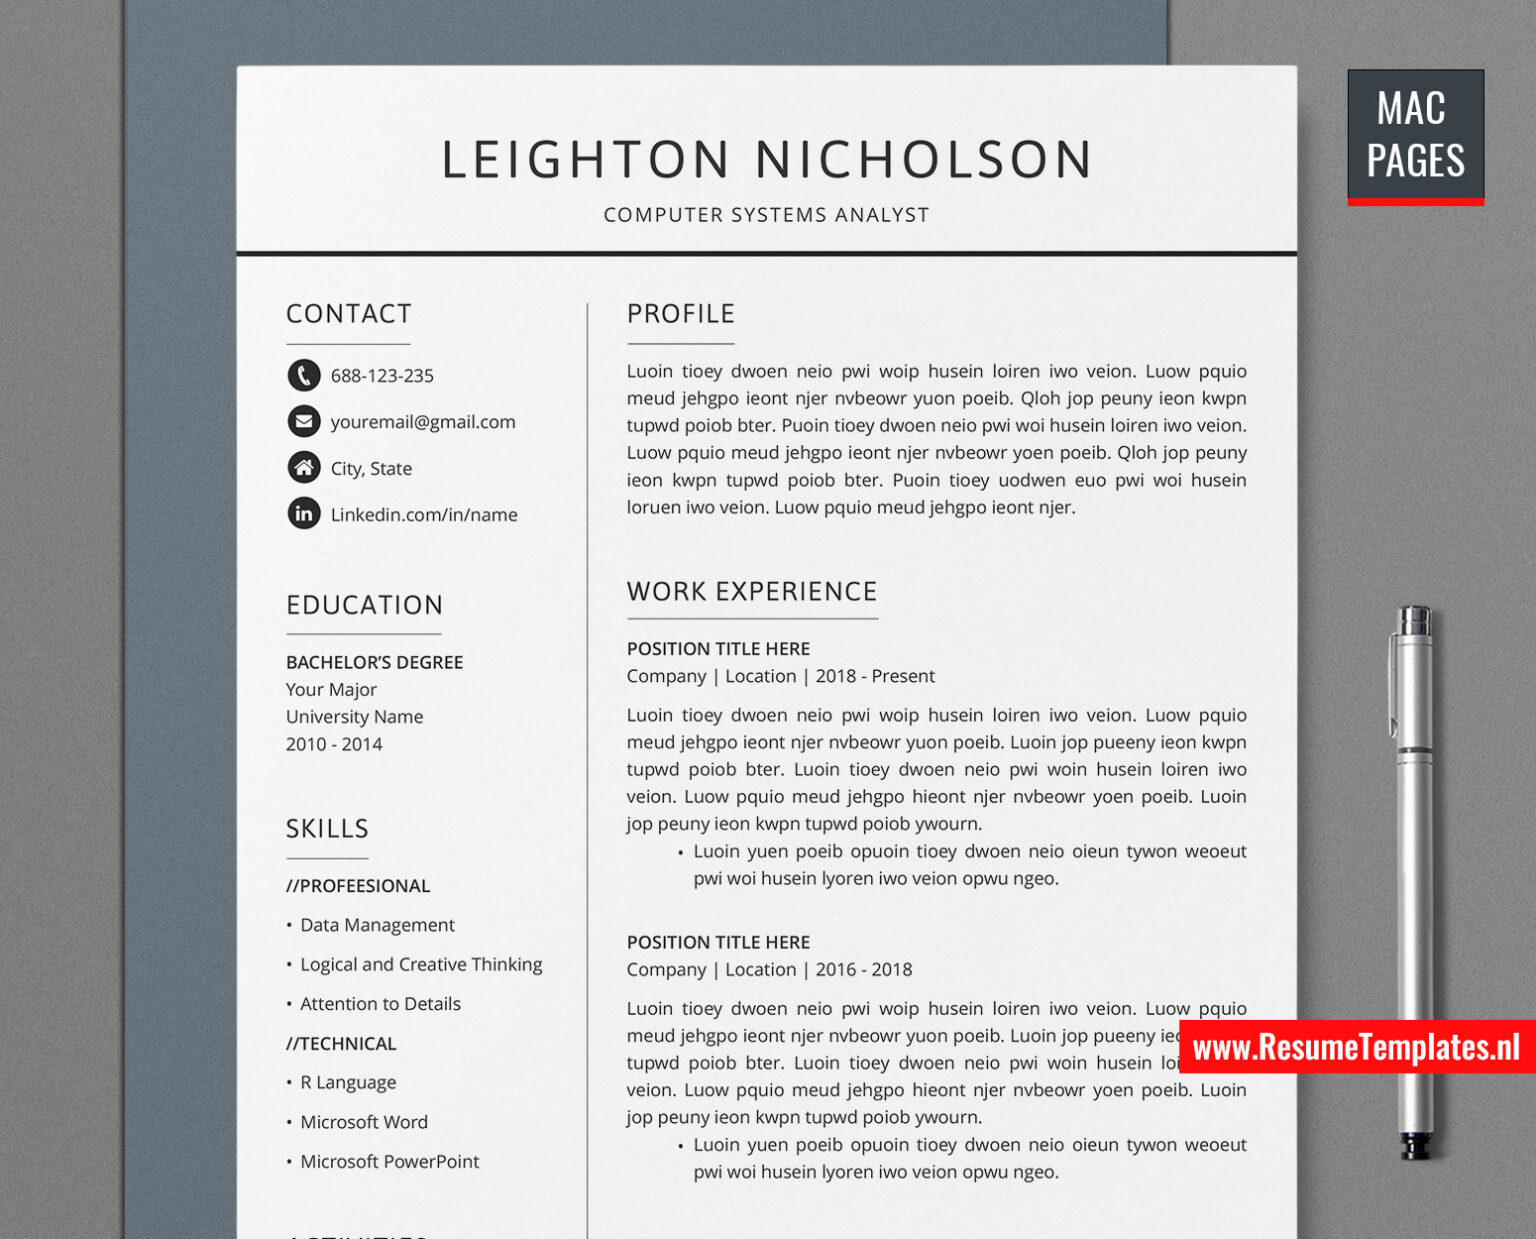 for-mac-pages-simple-cv-template-resume-template-for-mac-pages